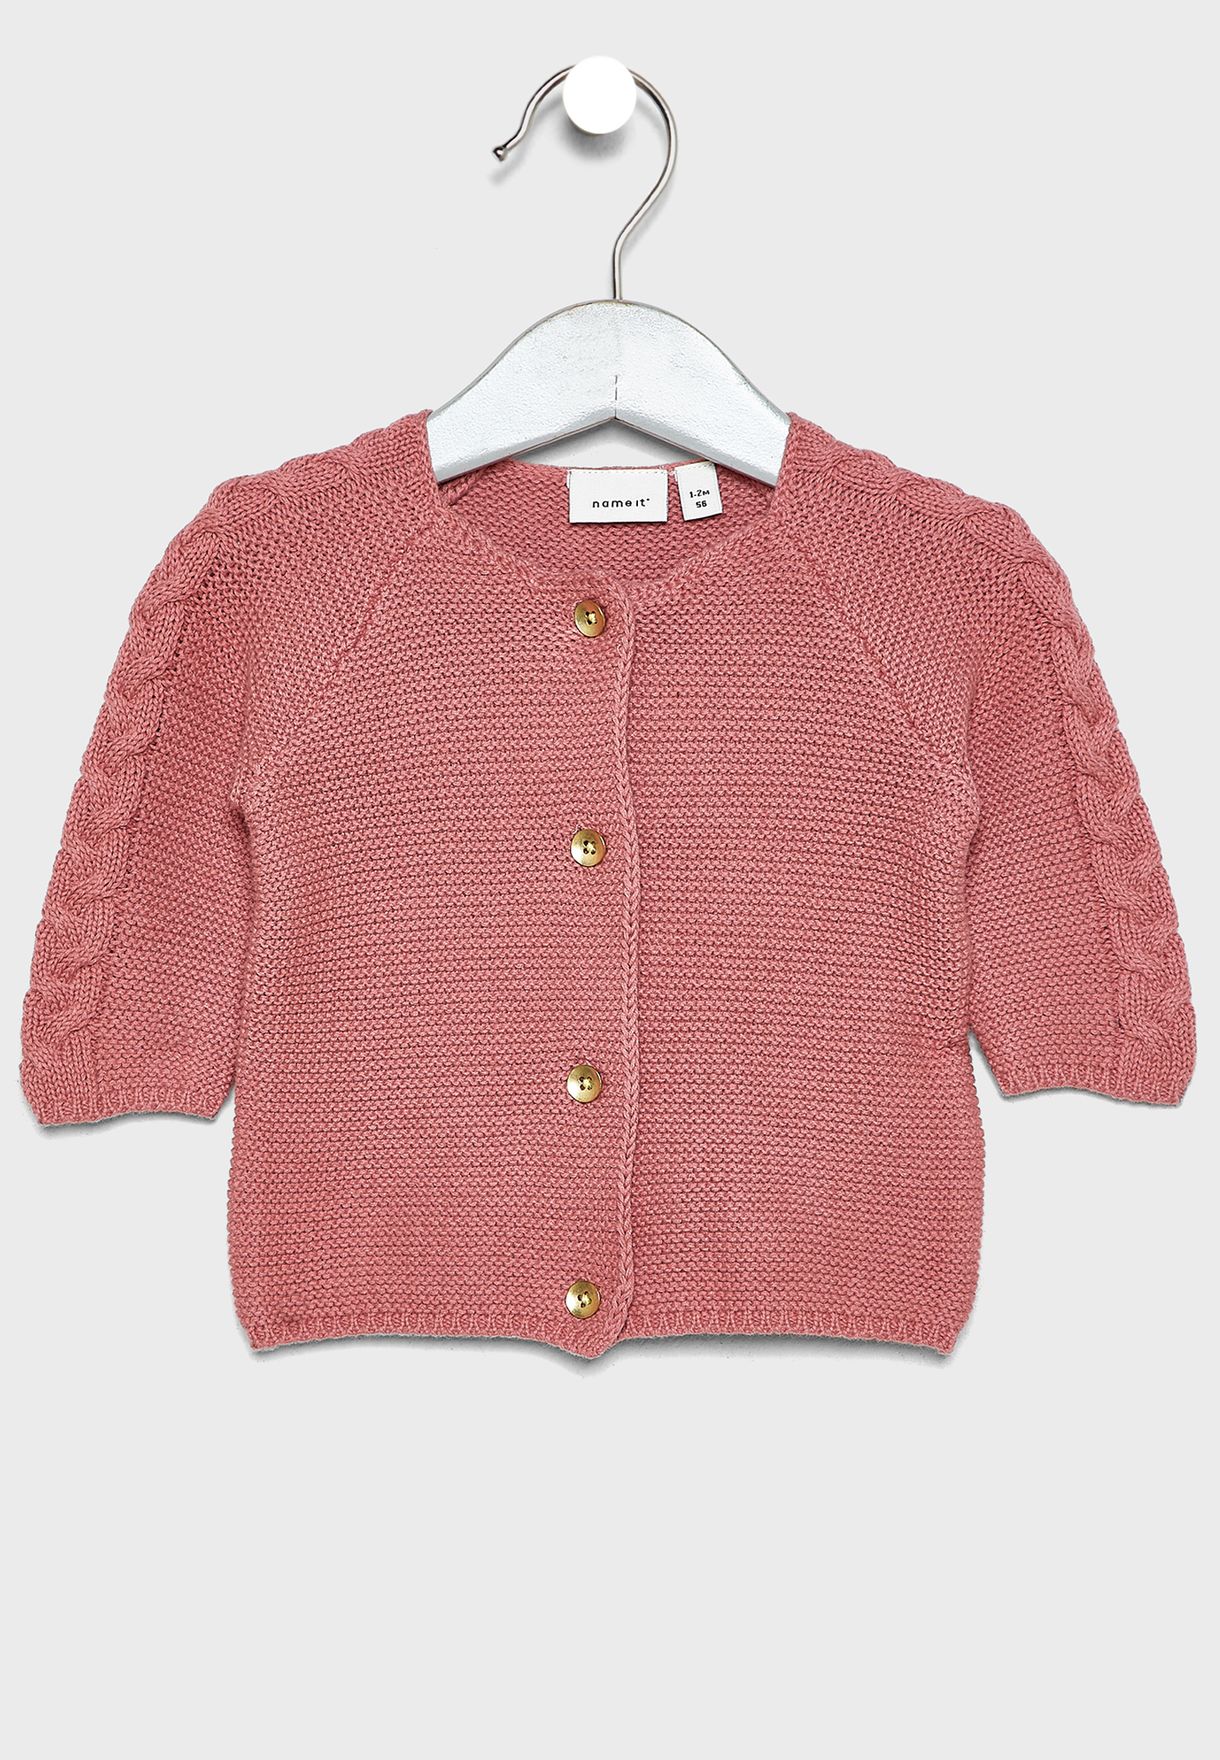 Name It pink Infant Knitted Cardigan 